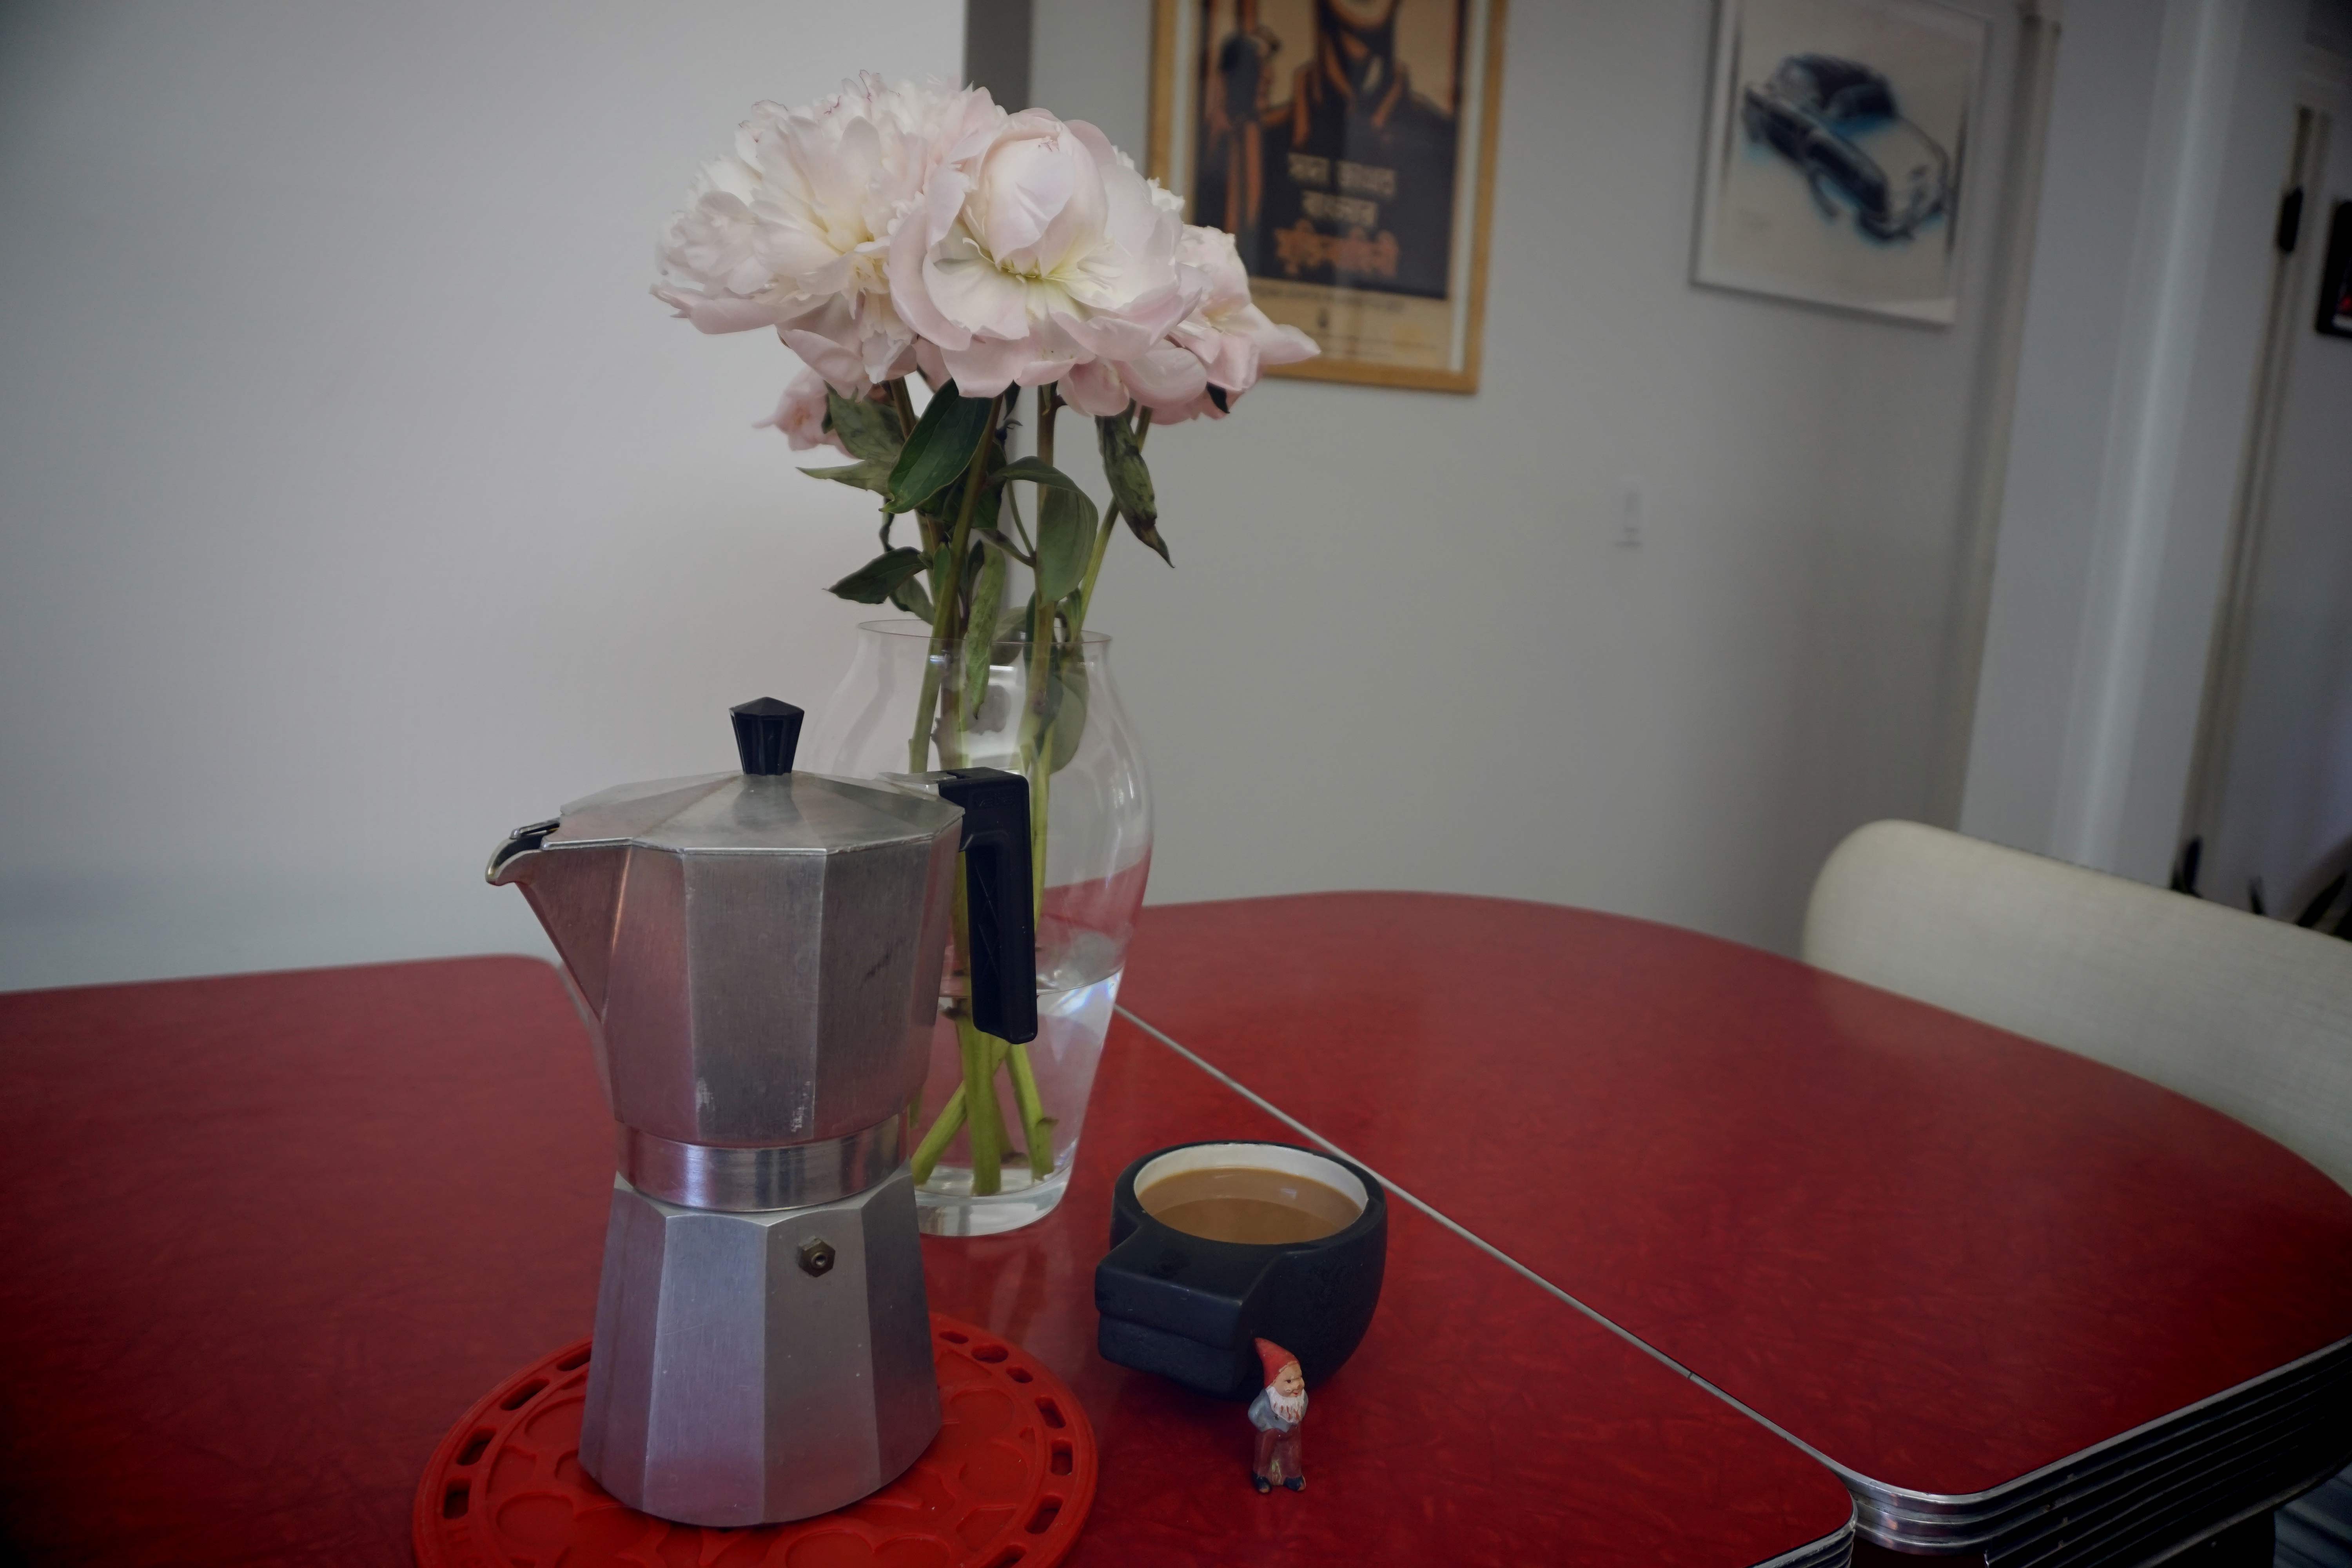 Photo of a coffee maker and some flowers. A small gnome is in the photo.